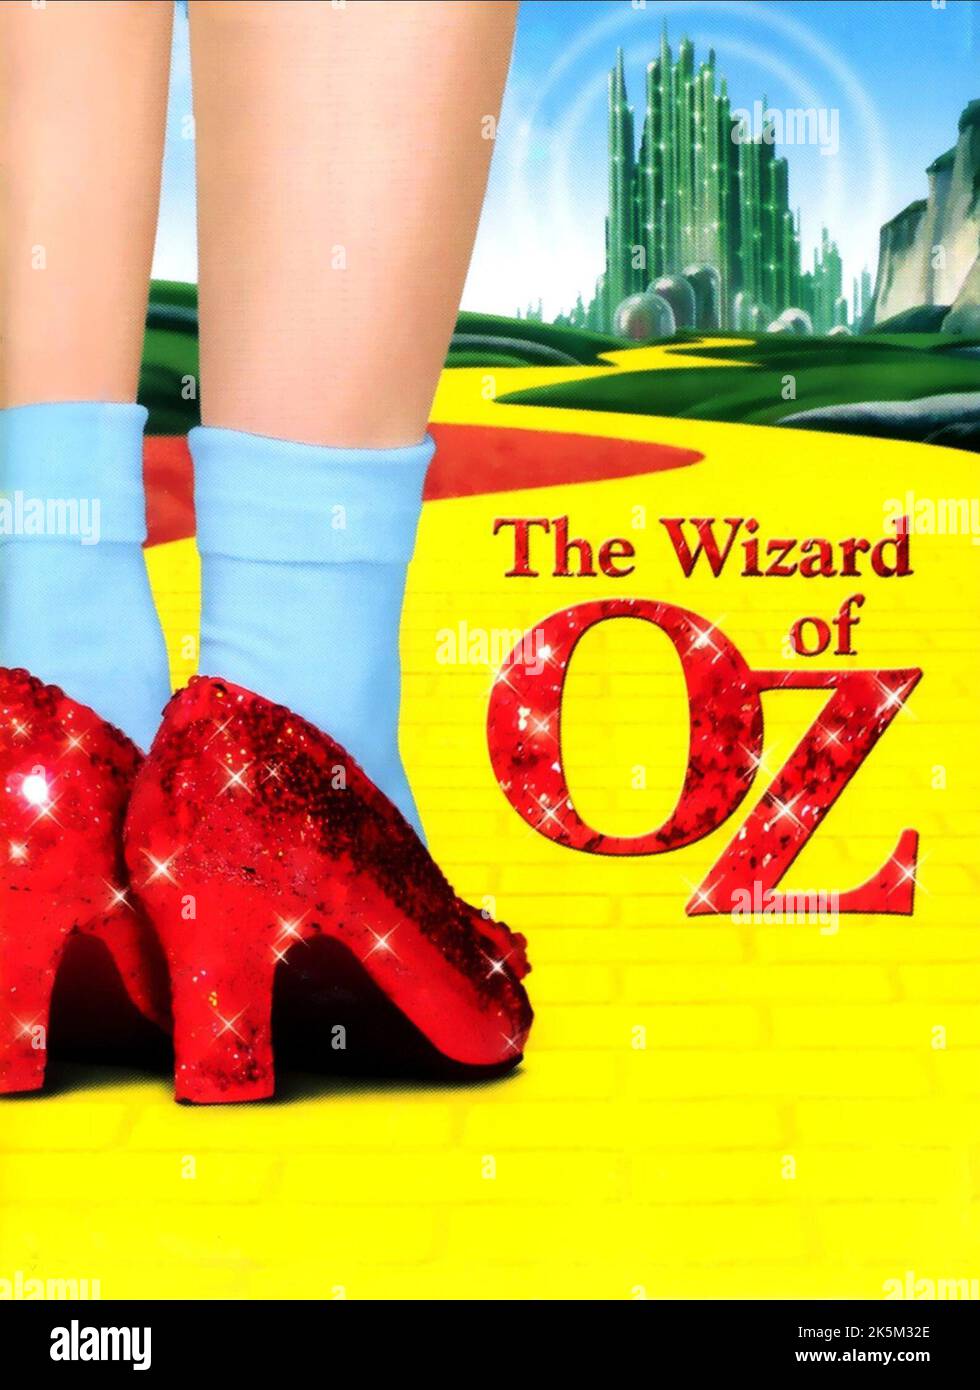 The Wizard of Oz 1939 The Wizard of Oz Movie Poster Judy Garland Foto Stock